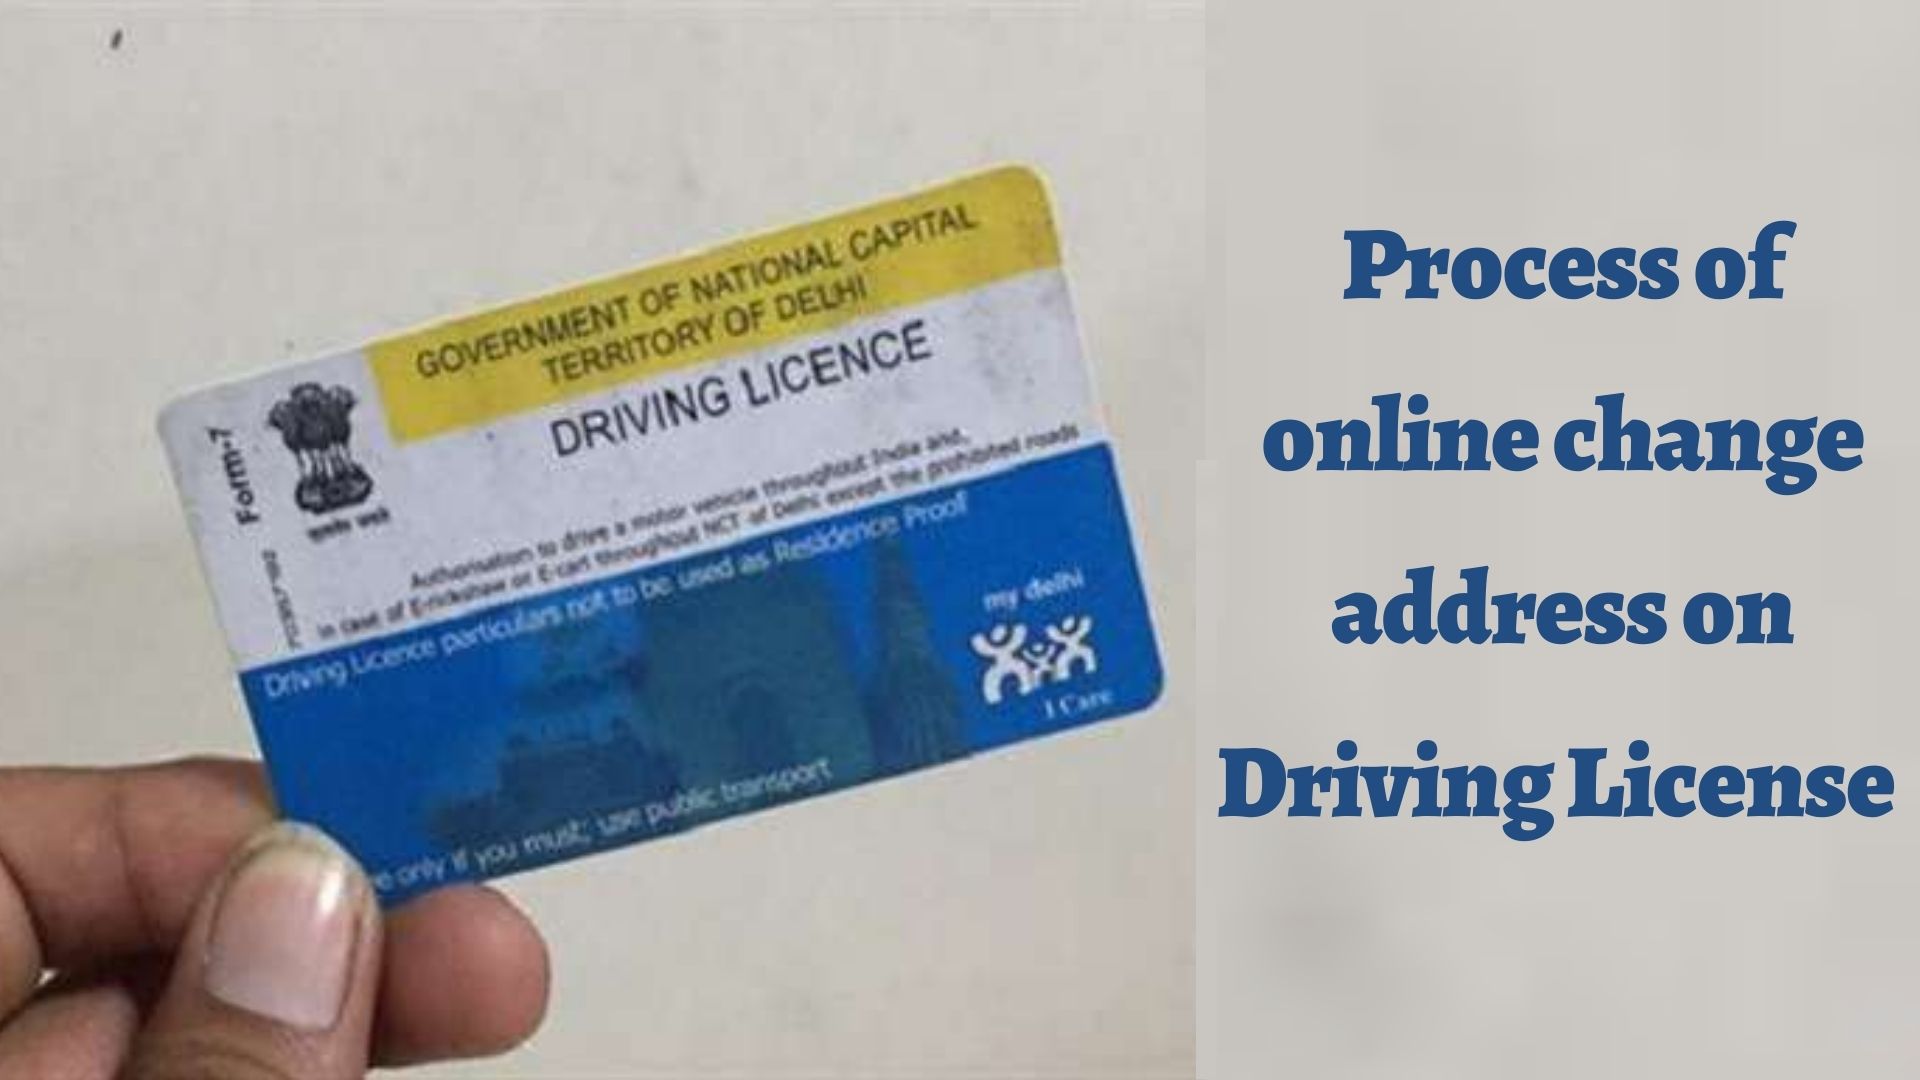 How to change address on driving license online